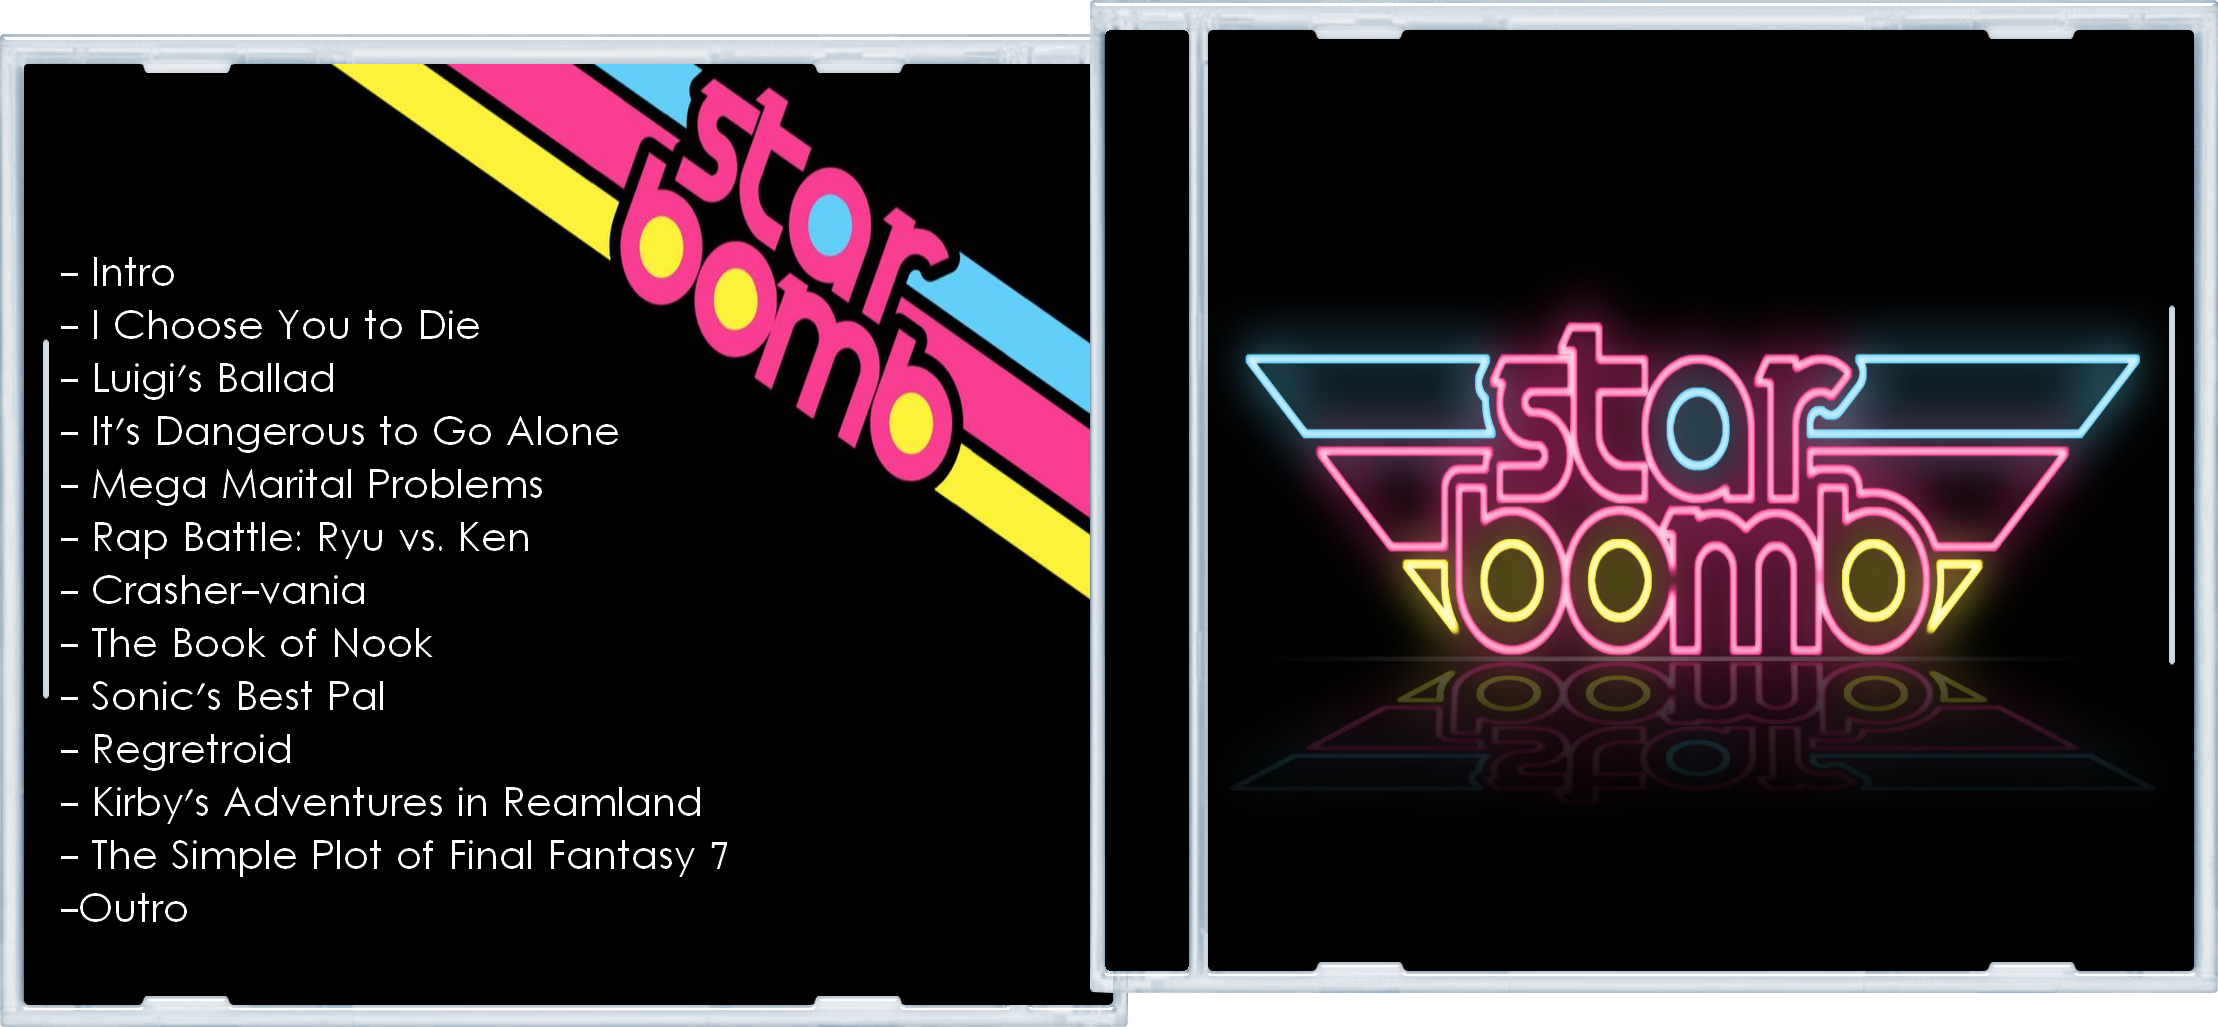 Starbomb box cover